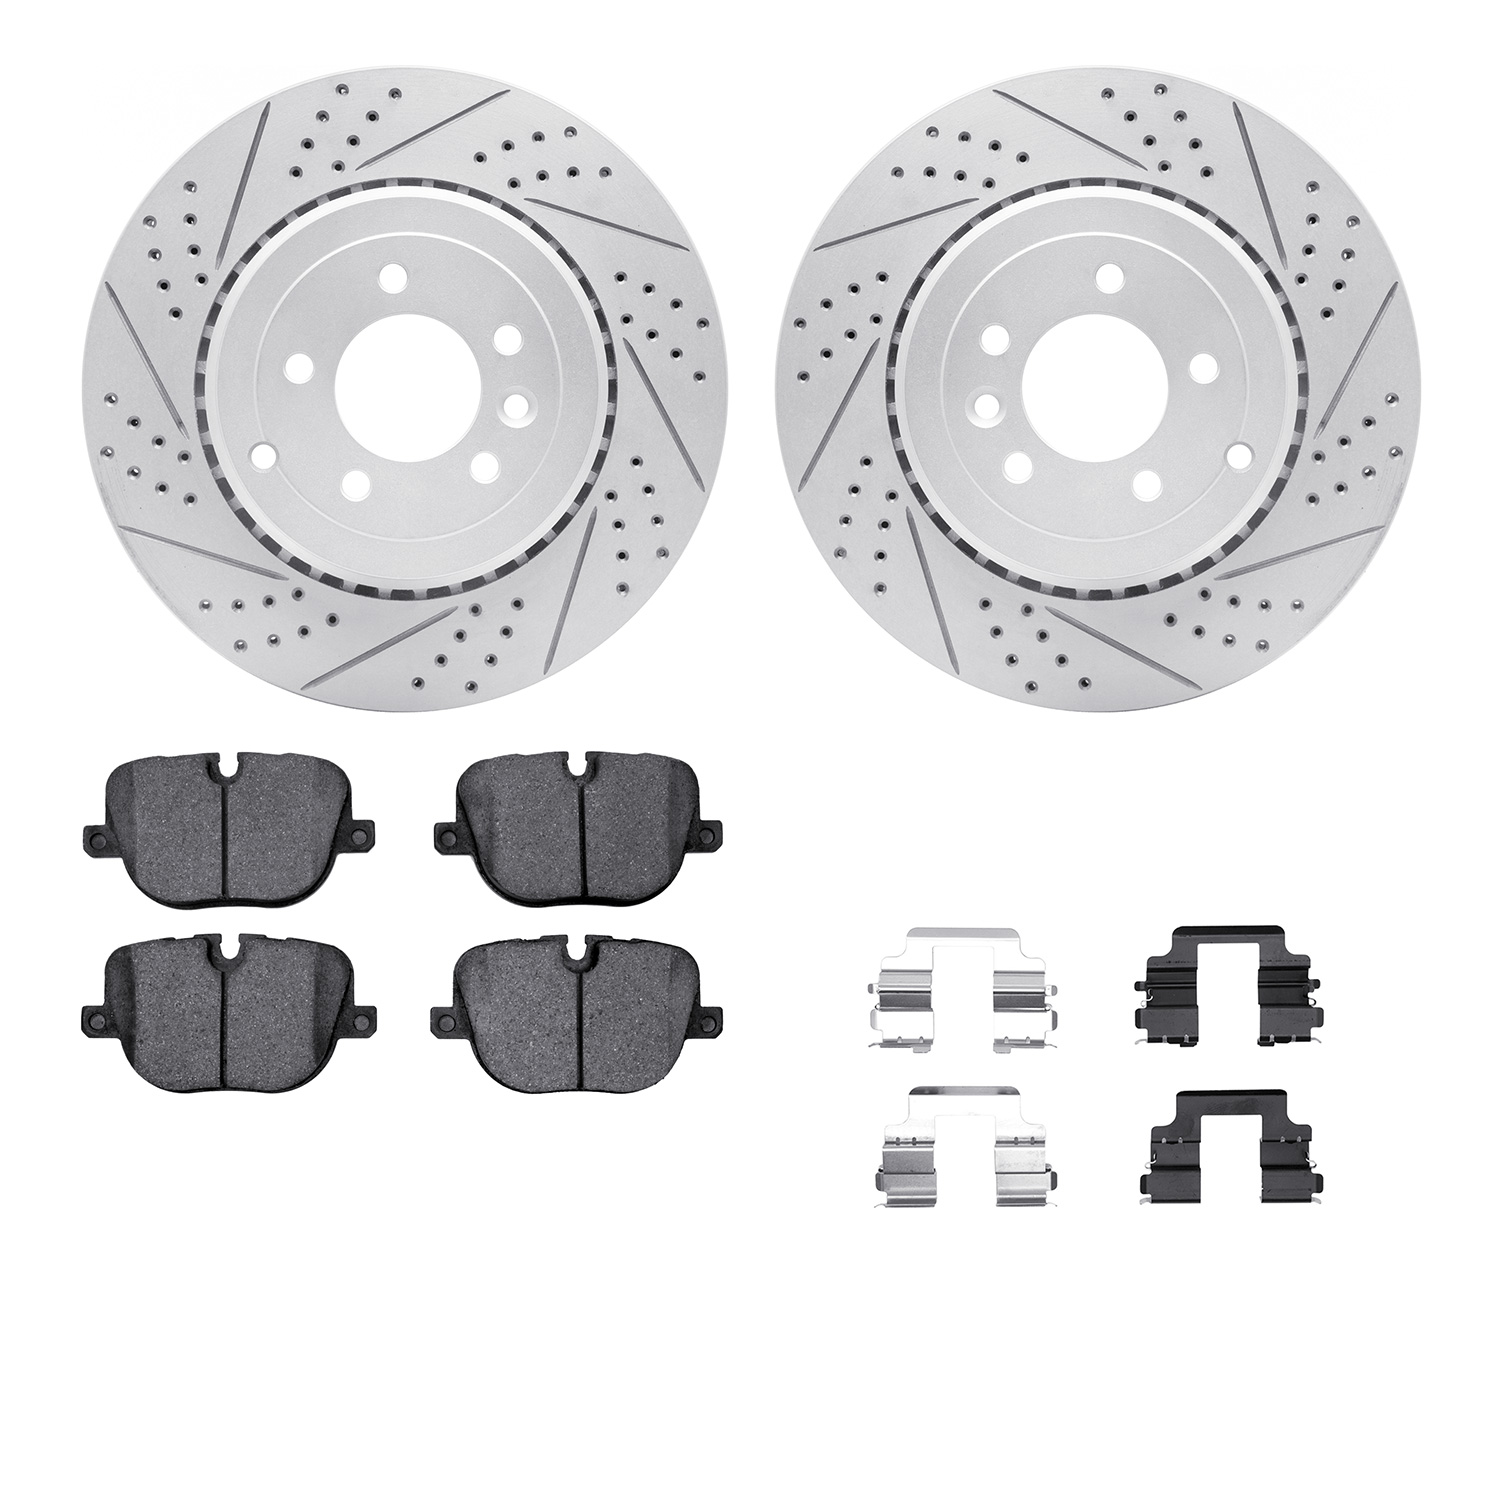 2512-11024 Geoperformance Drilled/Slotted Rotors w/5000 Advanced Brake Pads Kit & Hardware, 2010-2013 Land Rover, Position: Rear